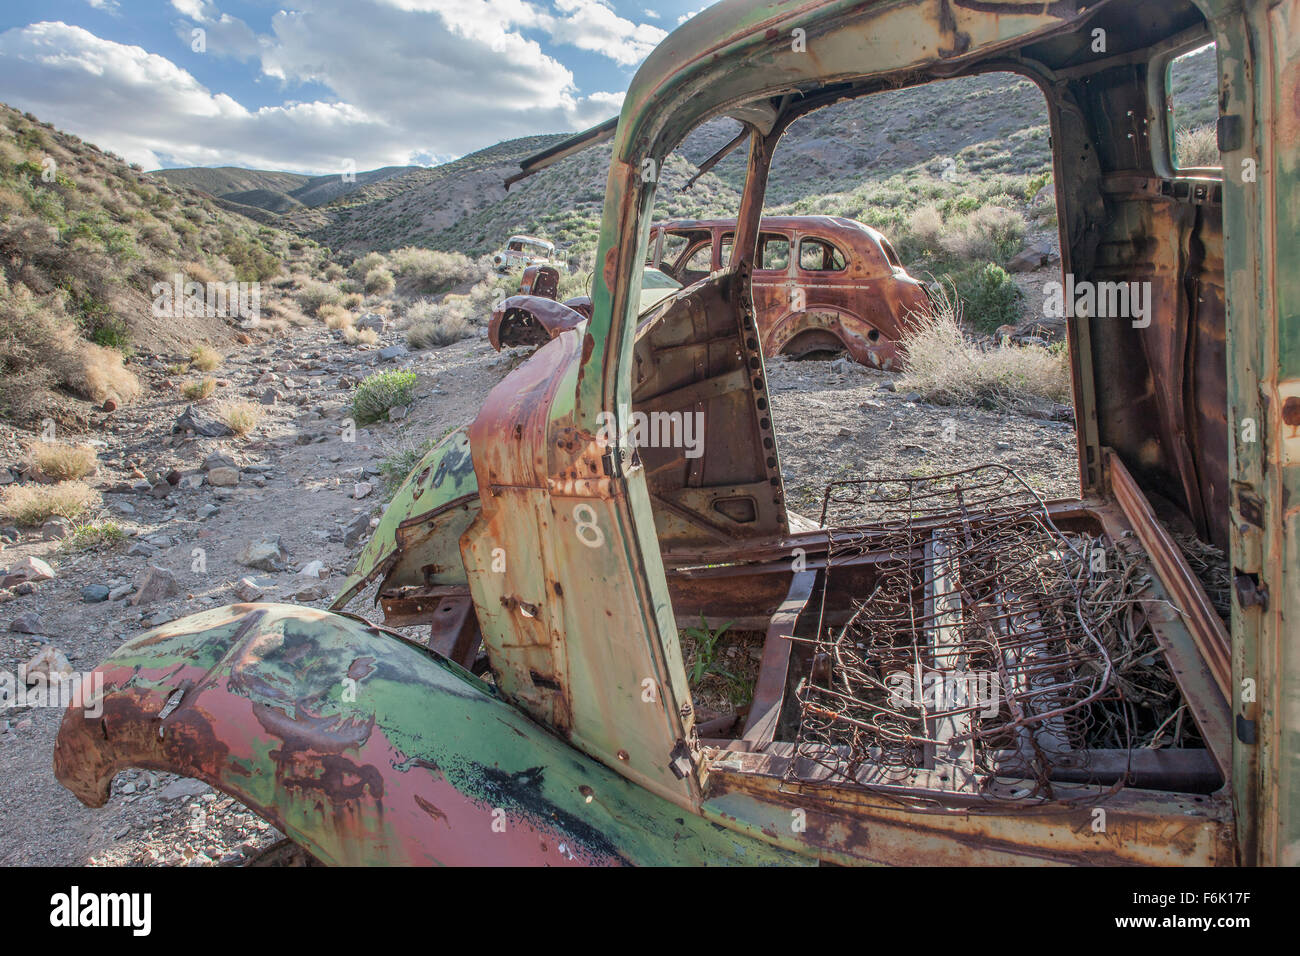 Vintage cars rusting away in a dry wash in Death Valley, California, USA. Stock Photo